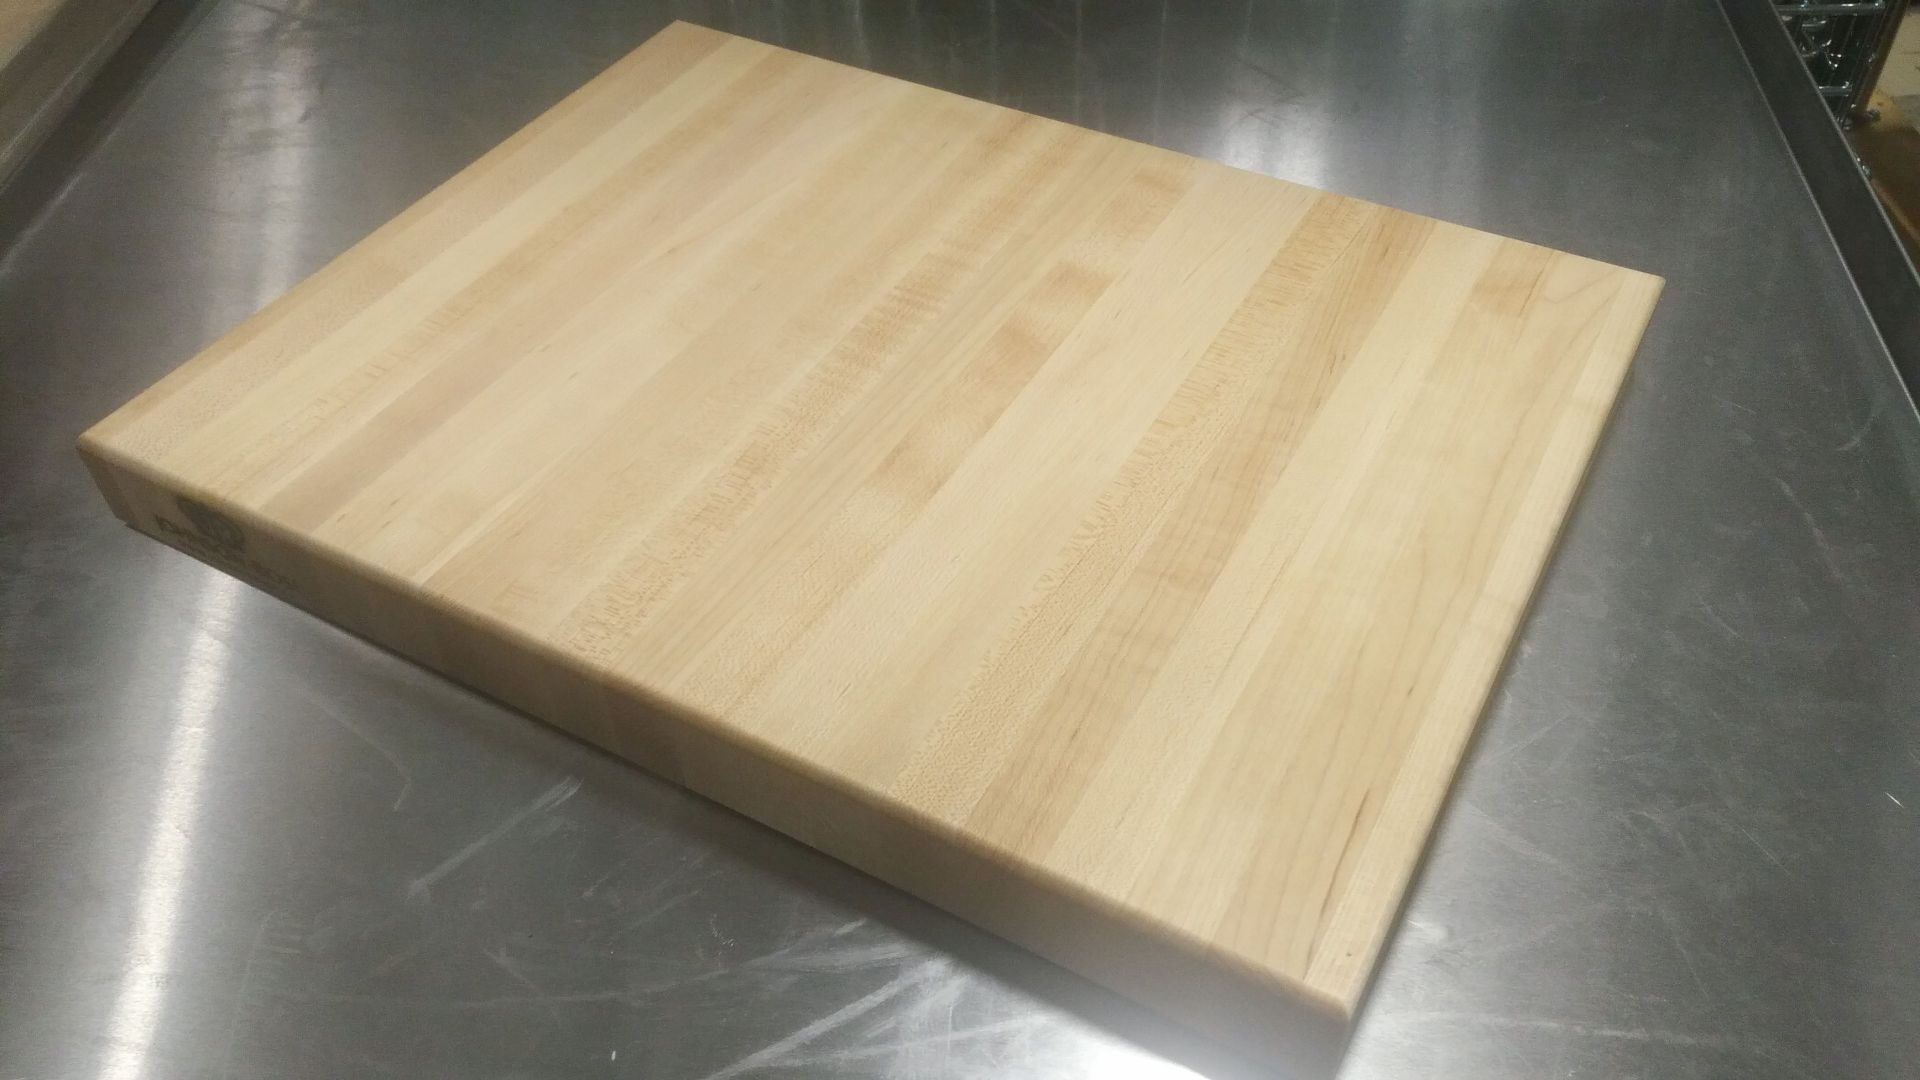 16" x 12" x 1.5" Hard Canadian Maple Solid Carving Board, Johnson Rose 71216